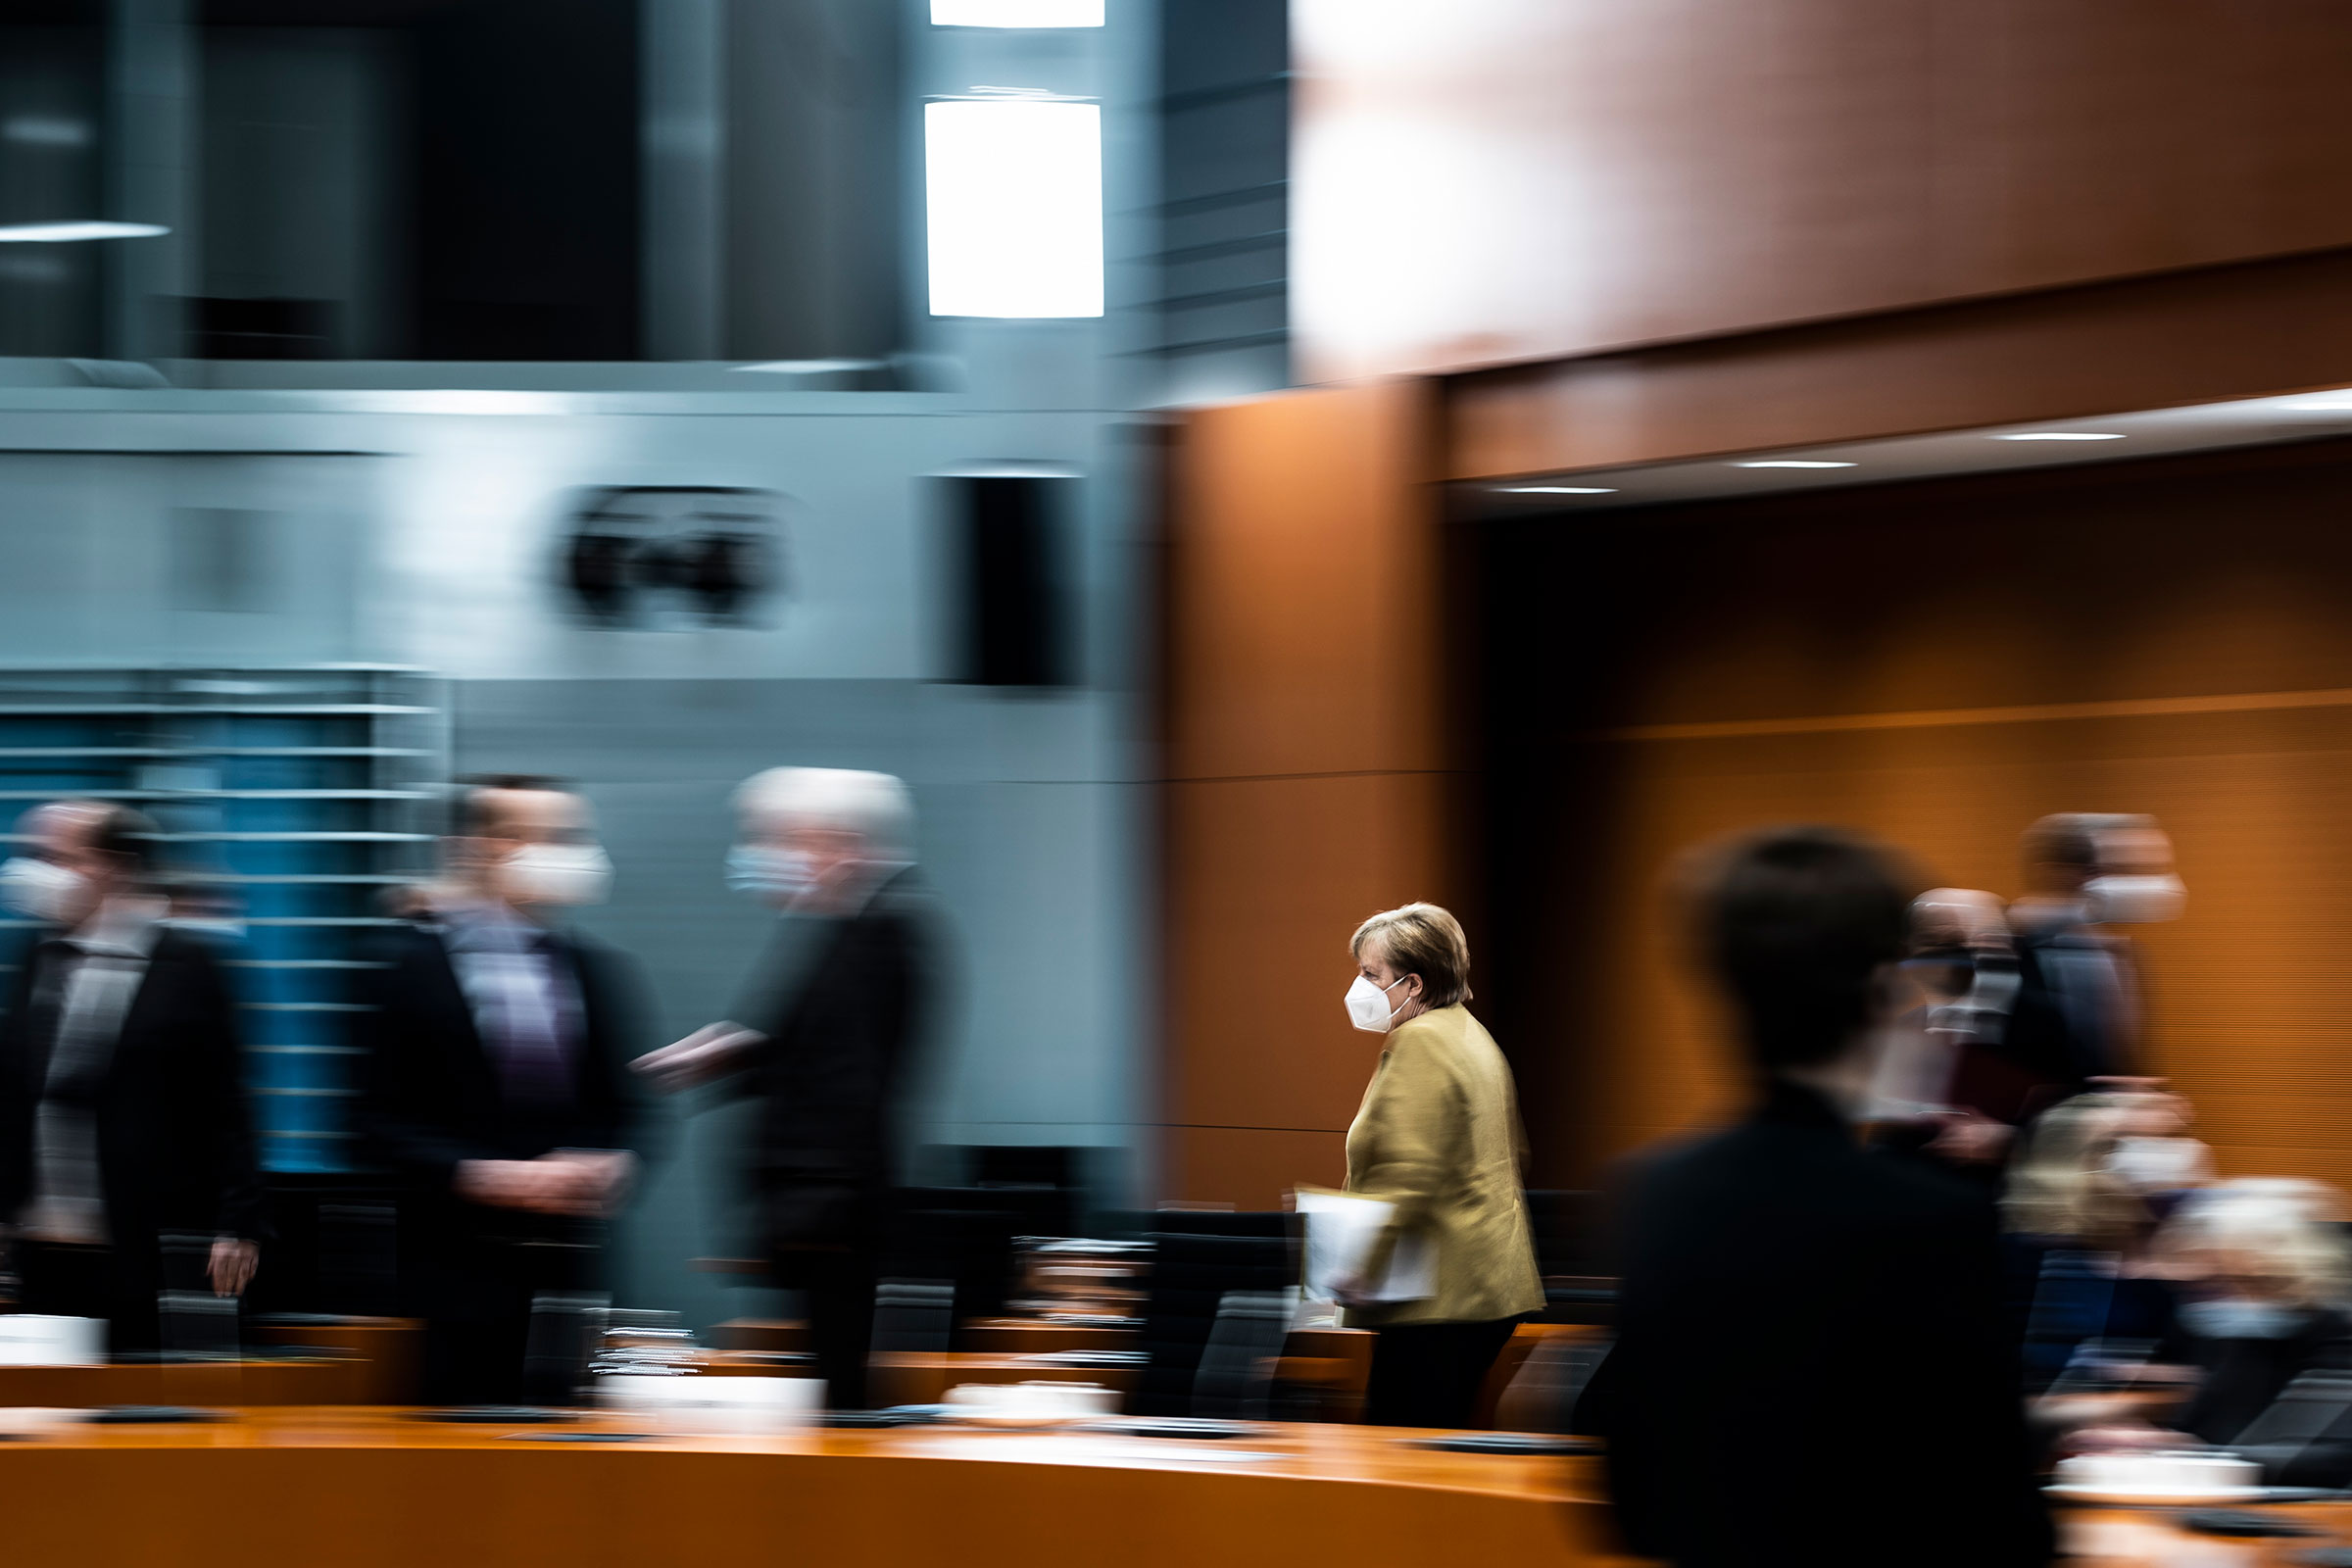 German Chancellor Angela Merkel arrives for the weekly meeting of the cabinet in Berlin, Germany on March 17, 2021. (Florian Gaertner—Photothek/Getty Images)